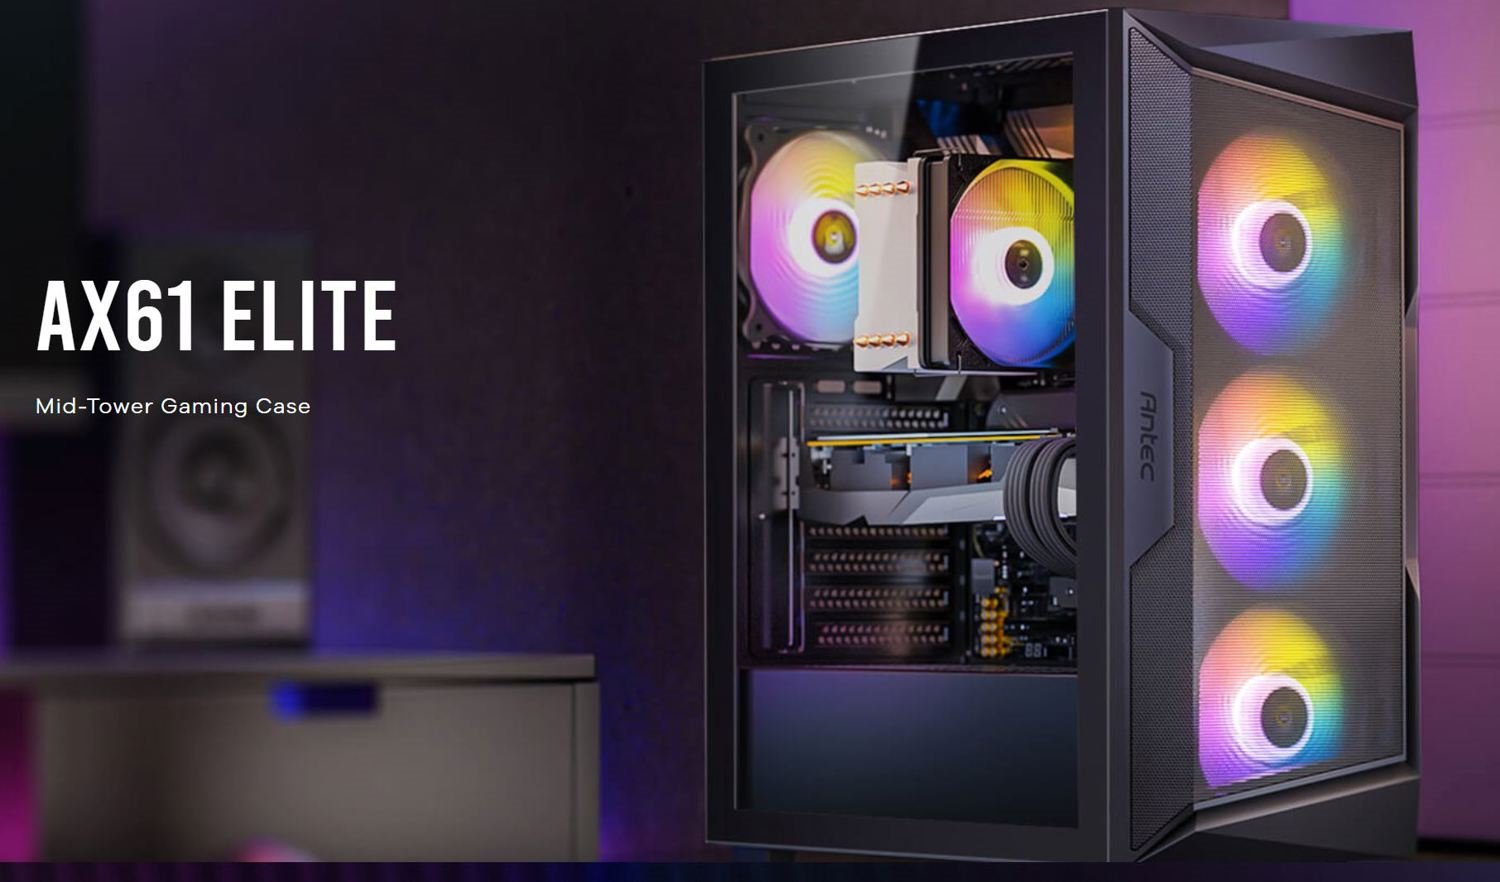 Antec Nax61 Elite Atx, 4X 120MM Argb Fans Included, Up To 8X 120MM. 360MM Radiator Front & 240MM Top, 32CM Gpu & 16CM Cpu, High Airflow Gaming Case